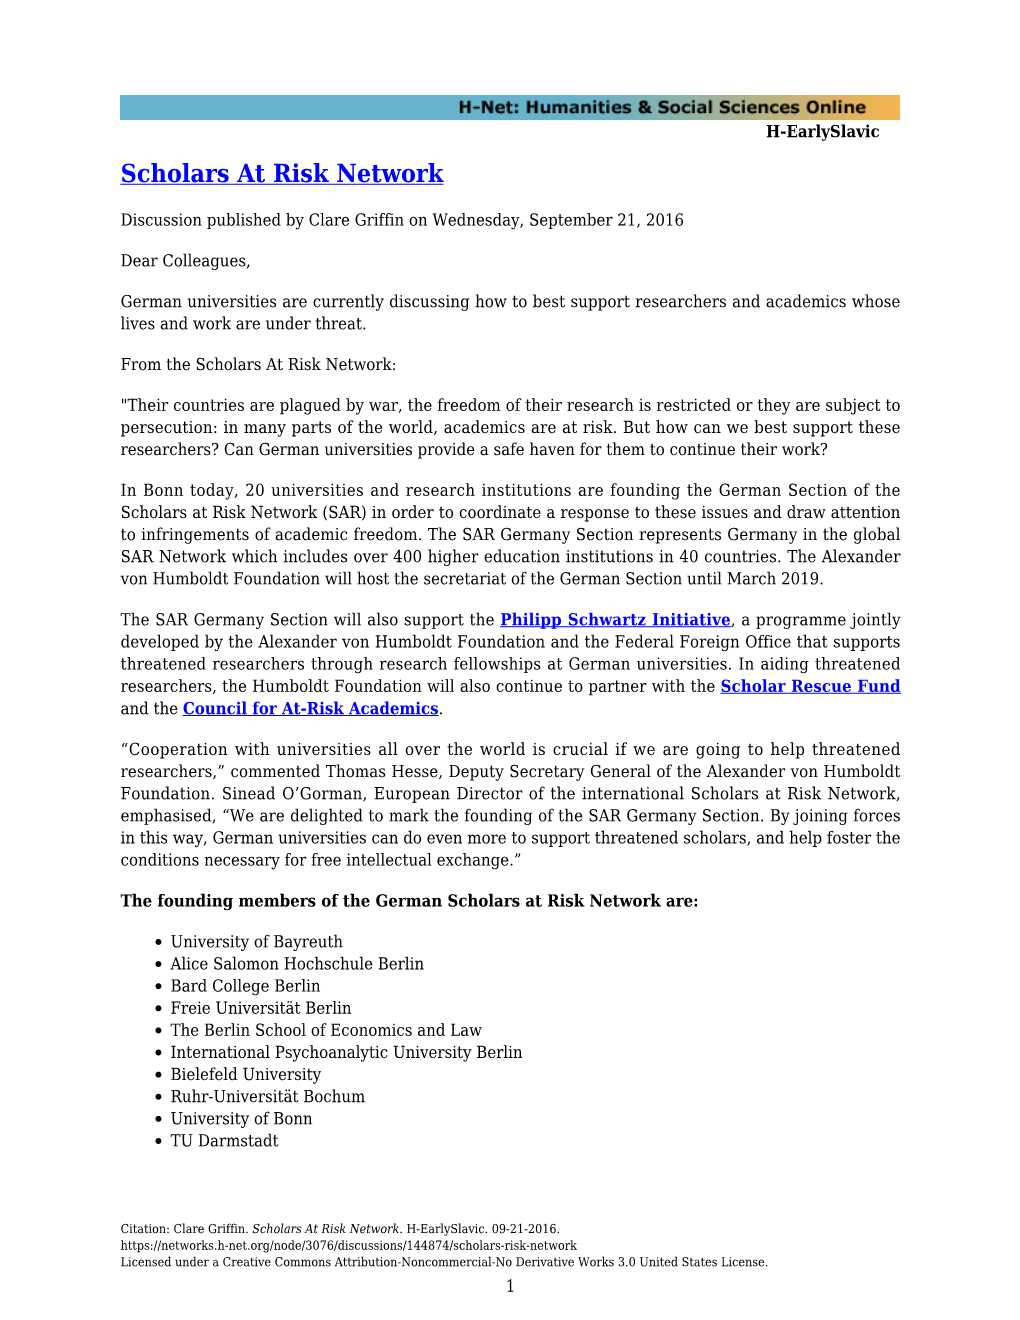 Scholars at Risk Network